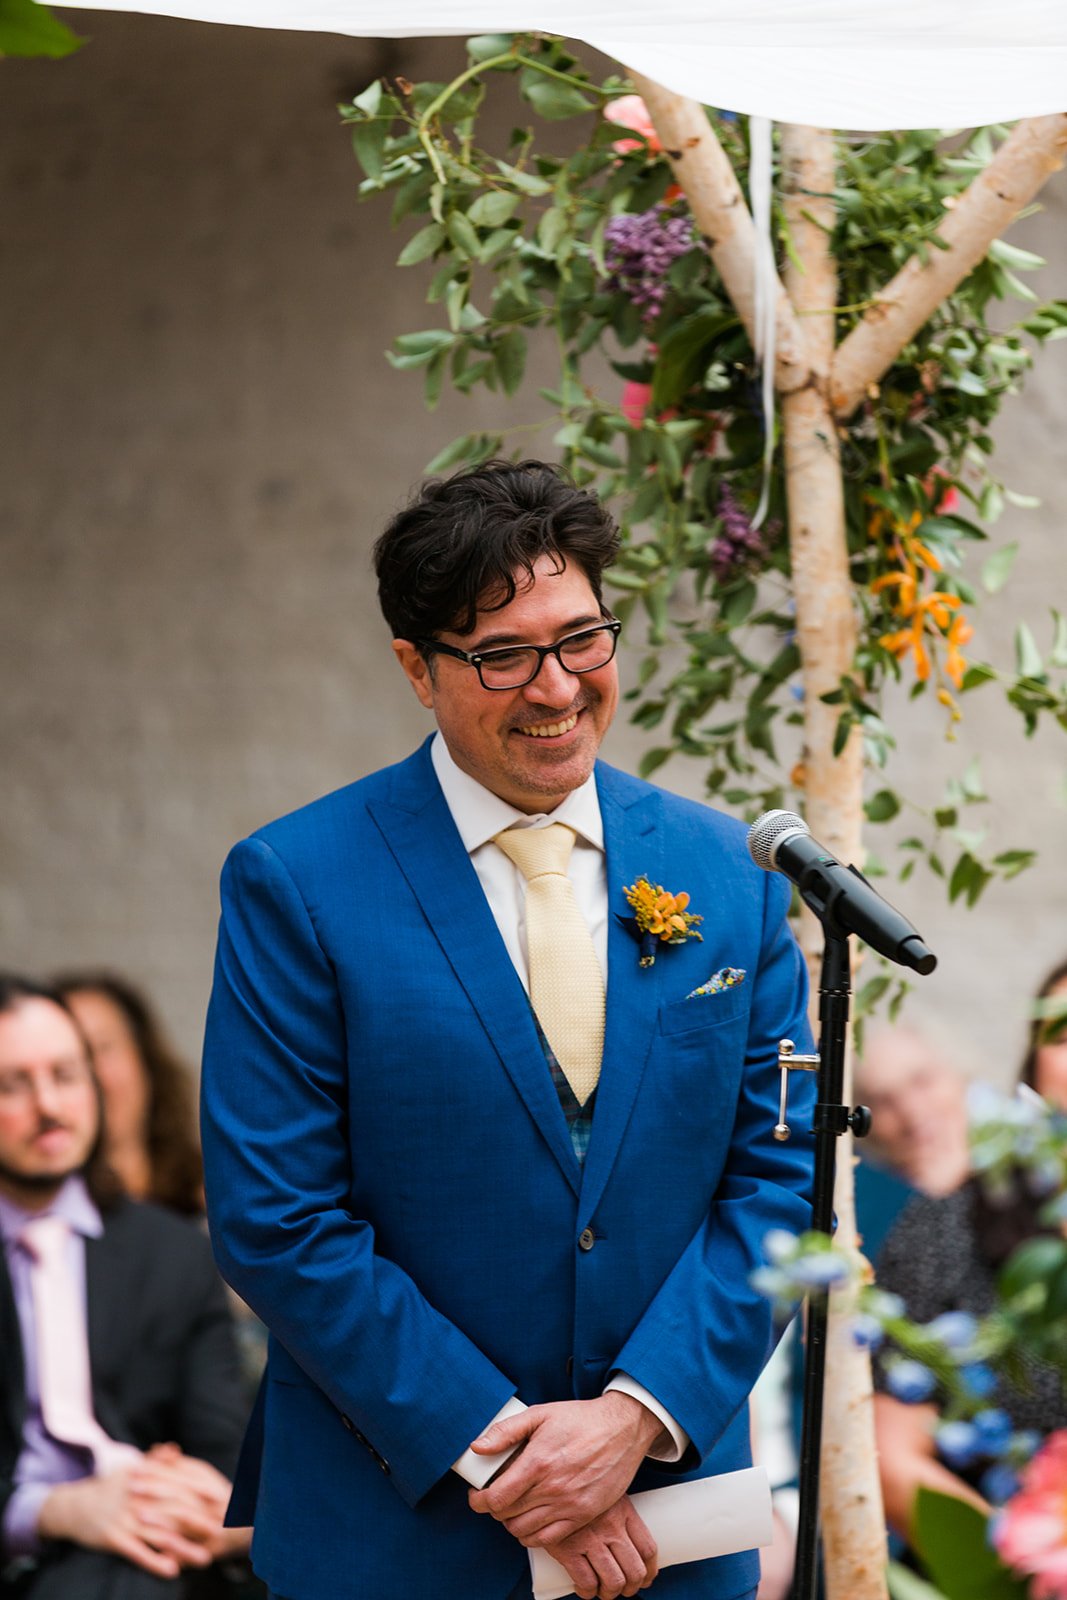  Candid, documentary photo of the groom under chupah during their nontraditional Jewish and Venezuelan wedding ceremony in the round at The Joinery Chicago an Industrial loft wedding venue In Logan Square. 